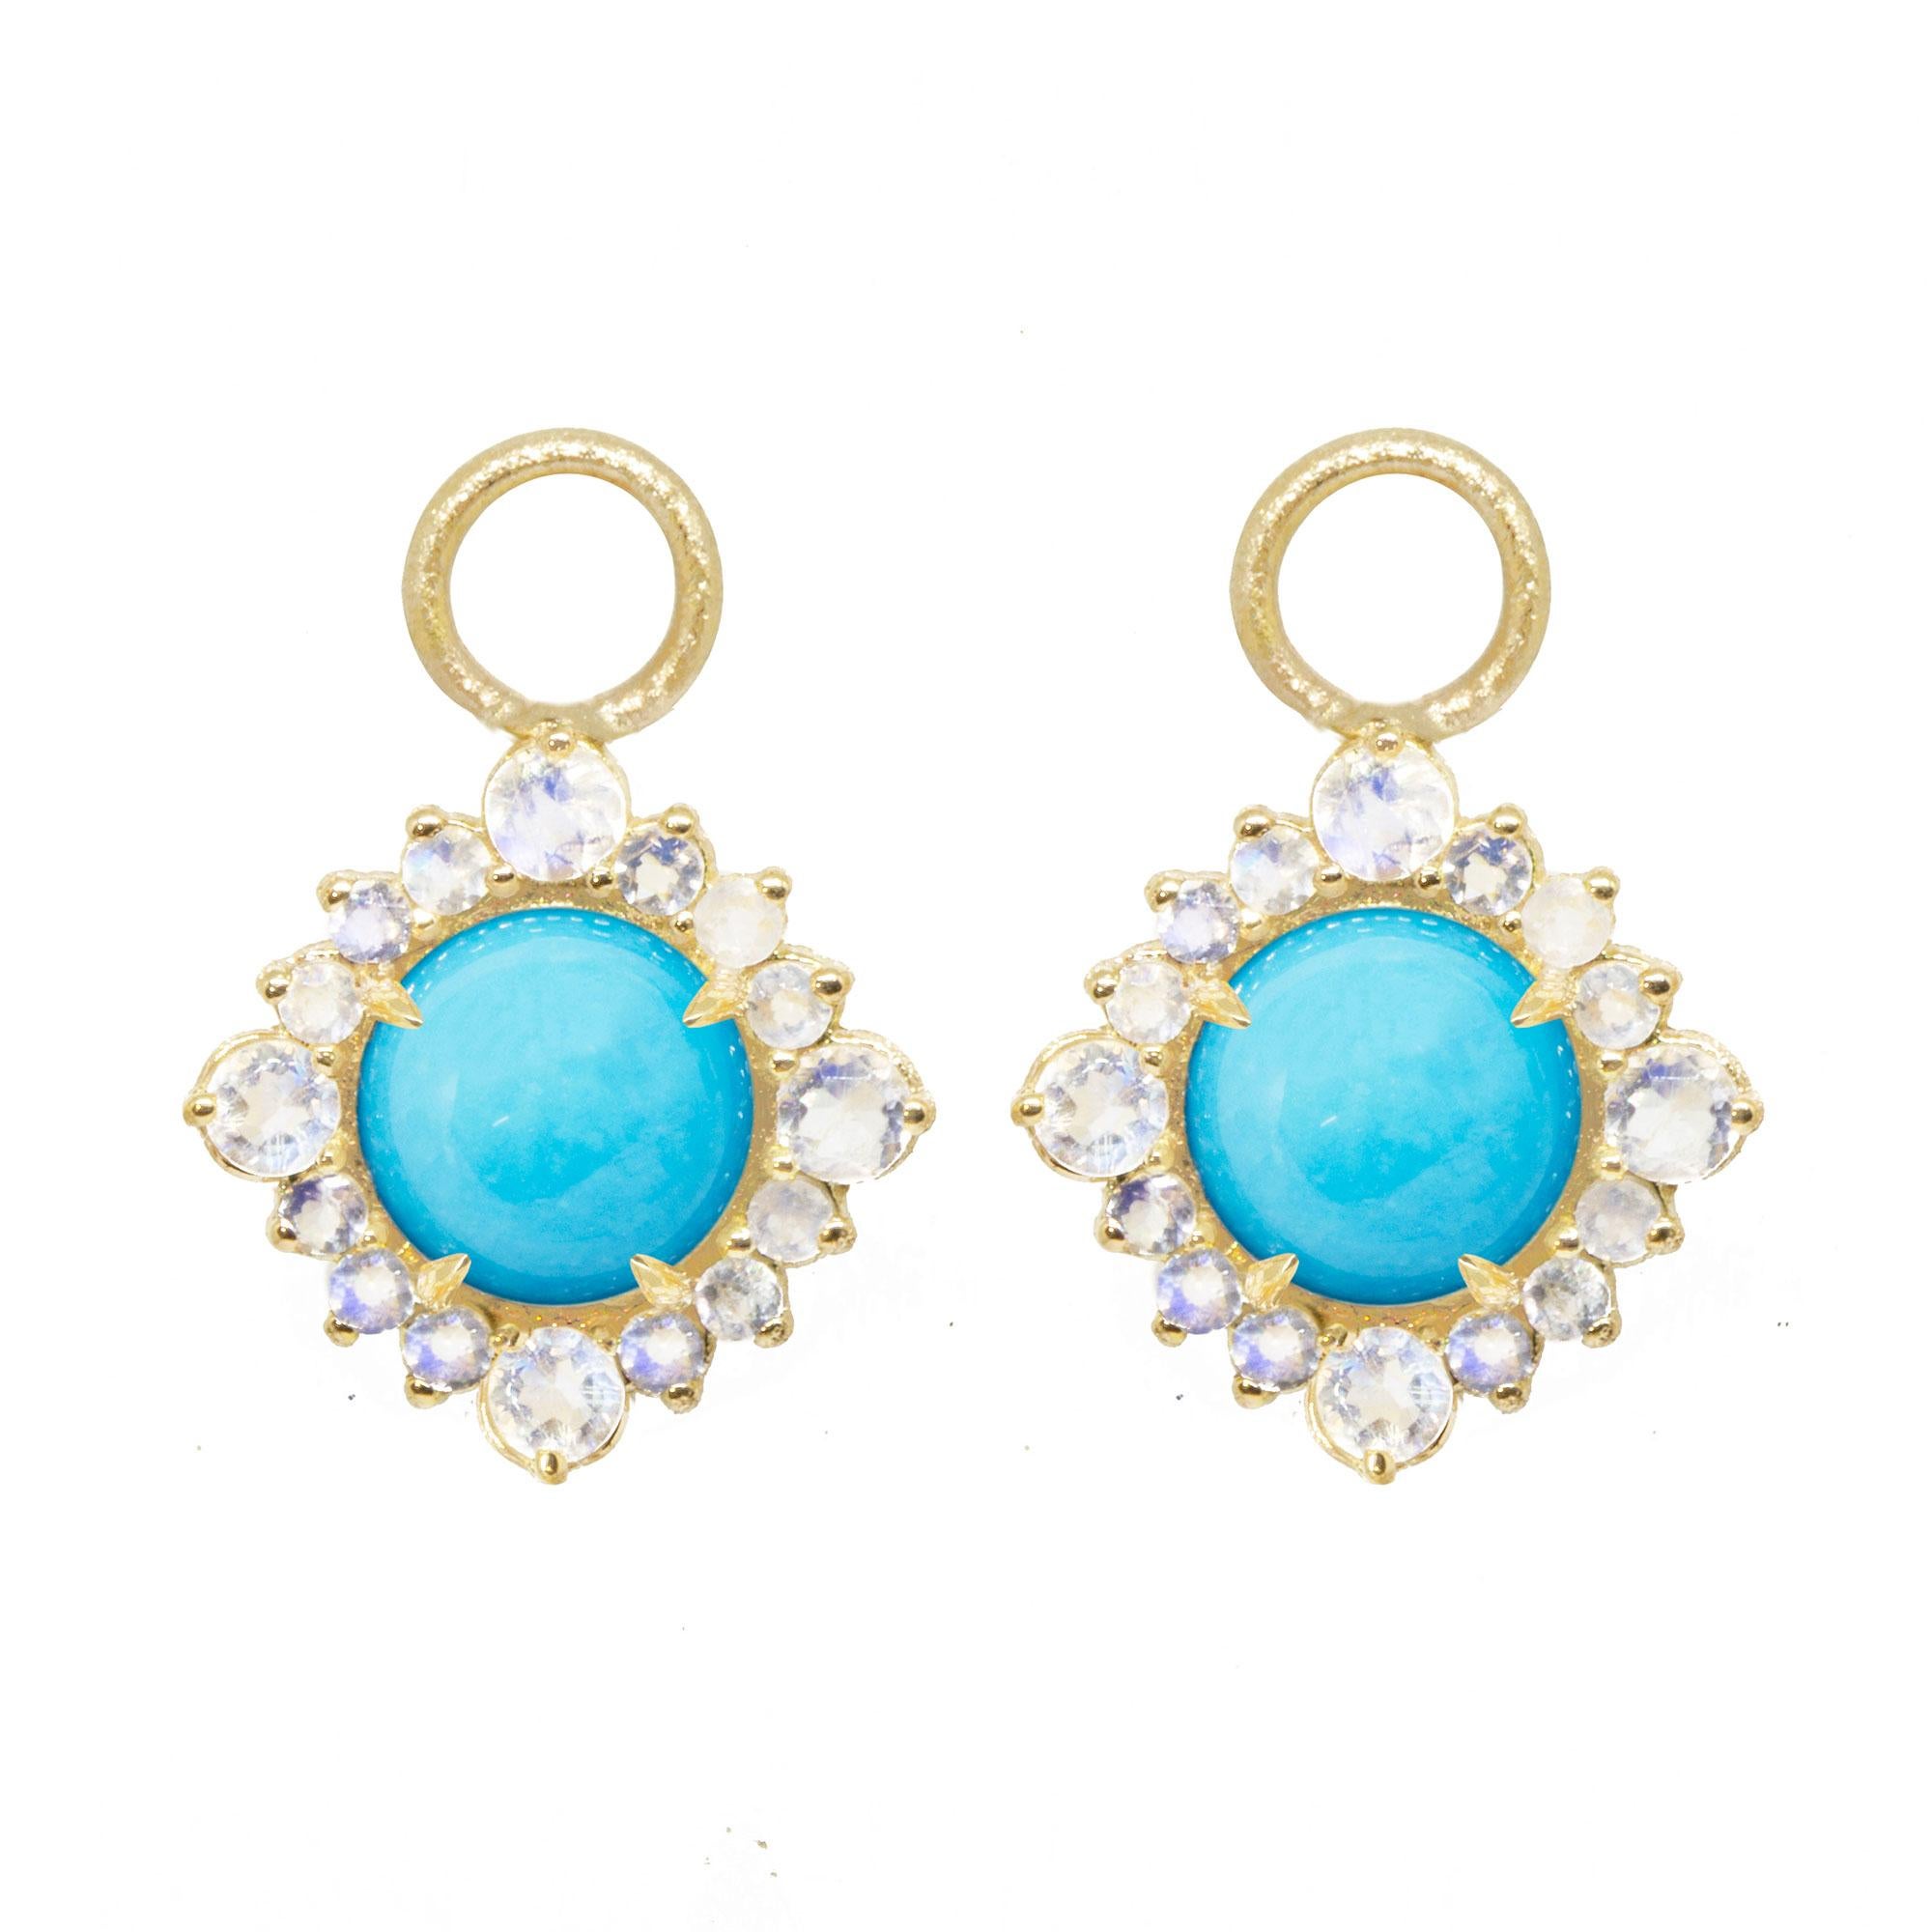 Our moonstone-accented Grace Gold Earring Charms are rimmed in gold, with a vivid turquoise gemstone at the center. Pair them with an hoop, mix them with any style, the Grace Silver Earring Charms made a great addition.

Hoops and charms are sold